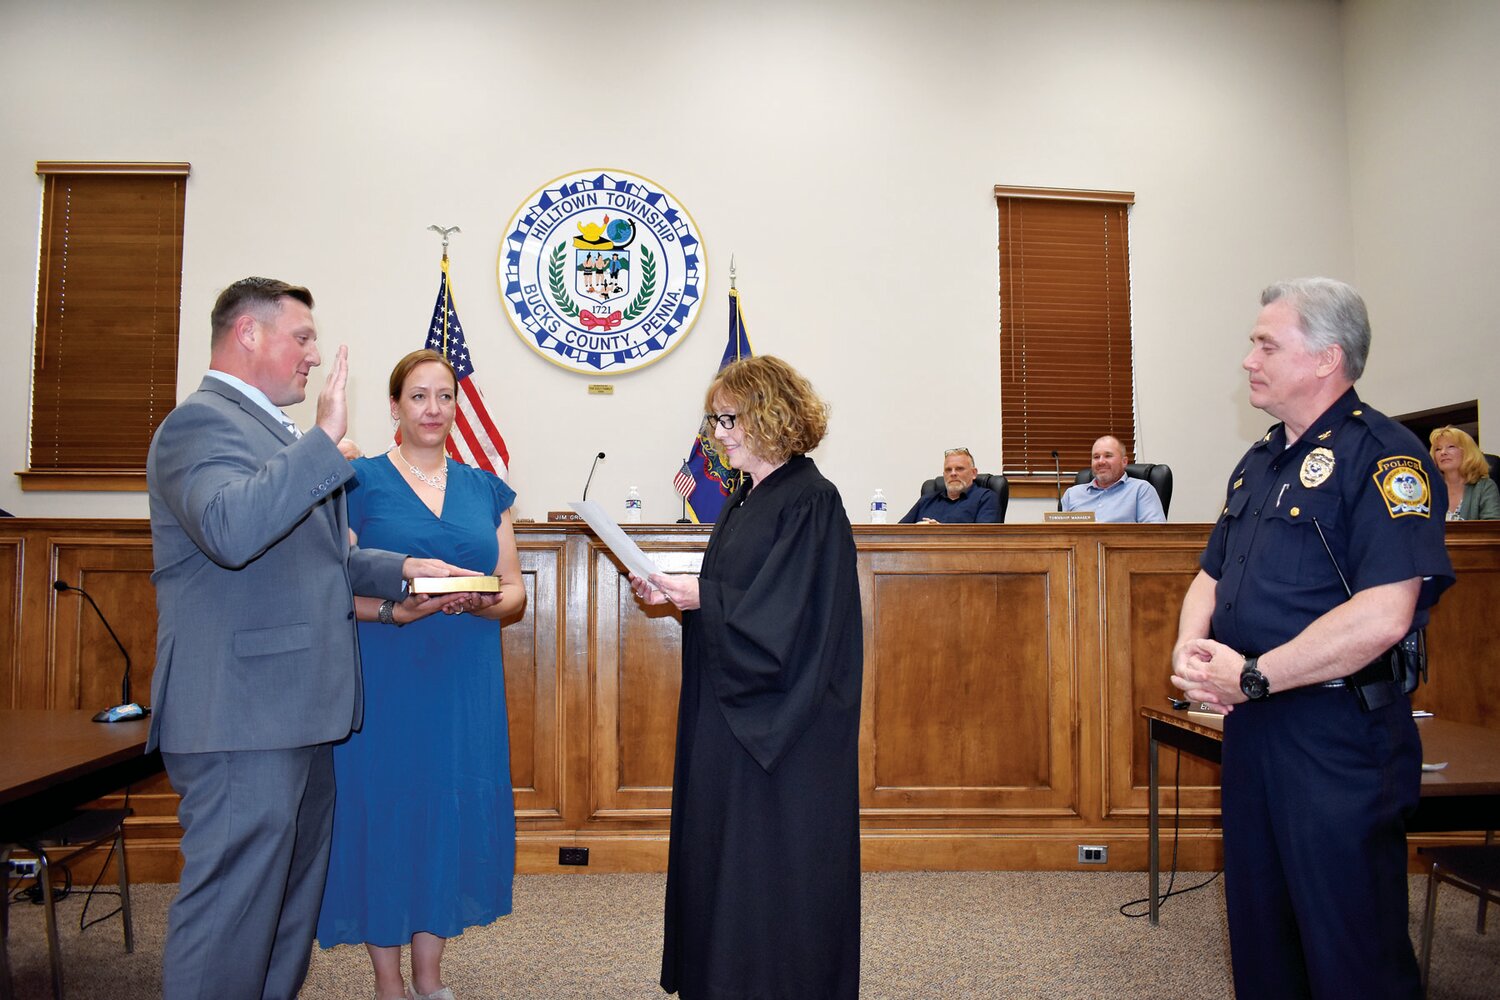 New Hilltown Township Police Officer Ryan Thomas is sworn in by District Judge Regina Armitage. Miller’s wife, Myra, holds the Bible as    police Chief Christopher Engelhart looks on.